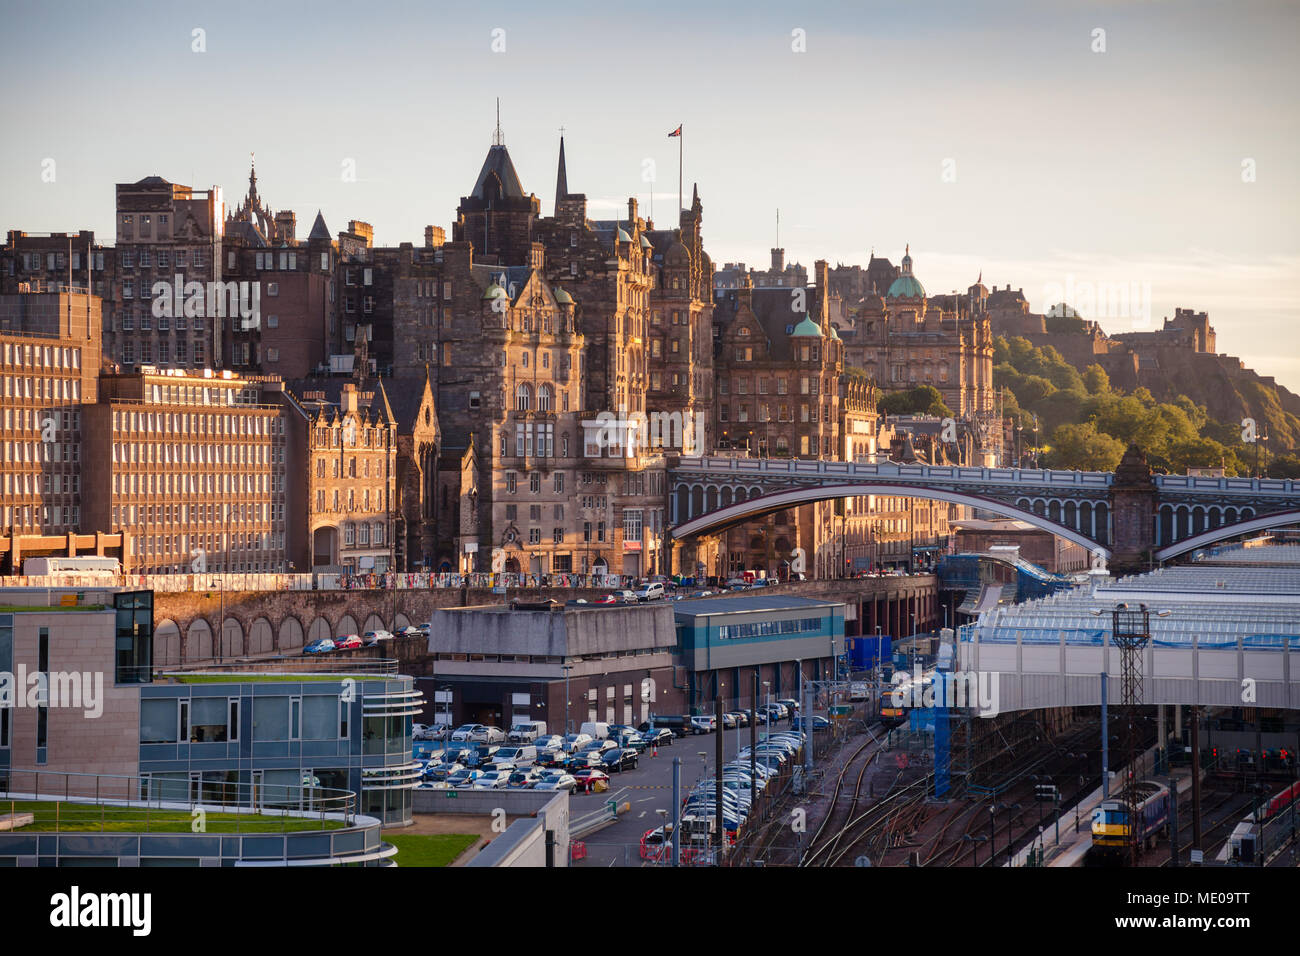 Edinburgh skyline as viewed from the Calton Hill with the Old Town, North Bridge, Waverley Railway Station and Edinburgh Castle in background Stock Photo